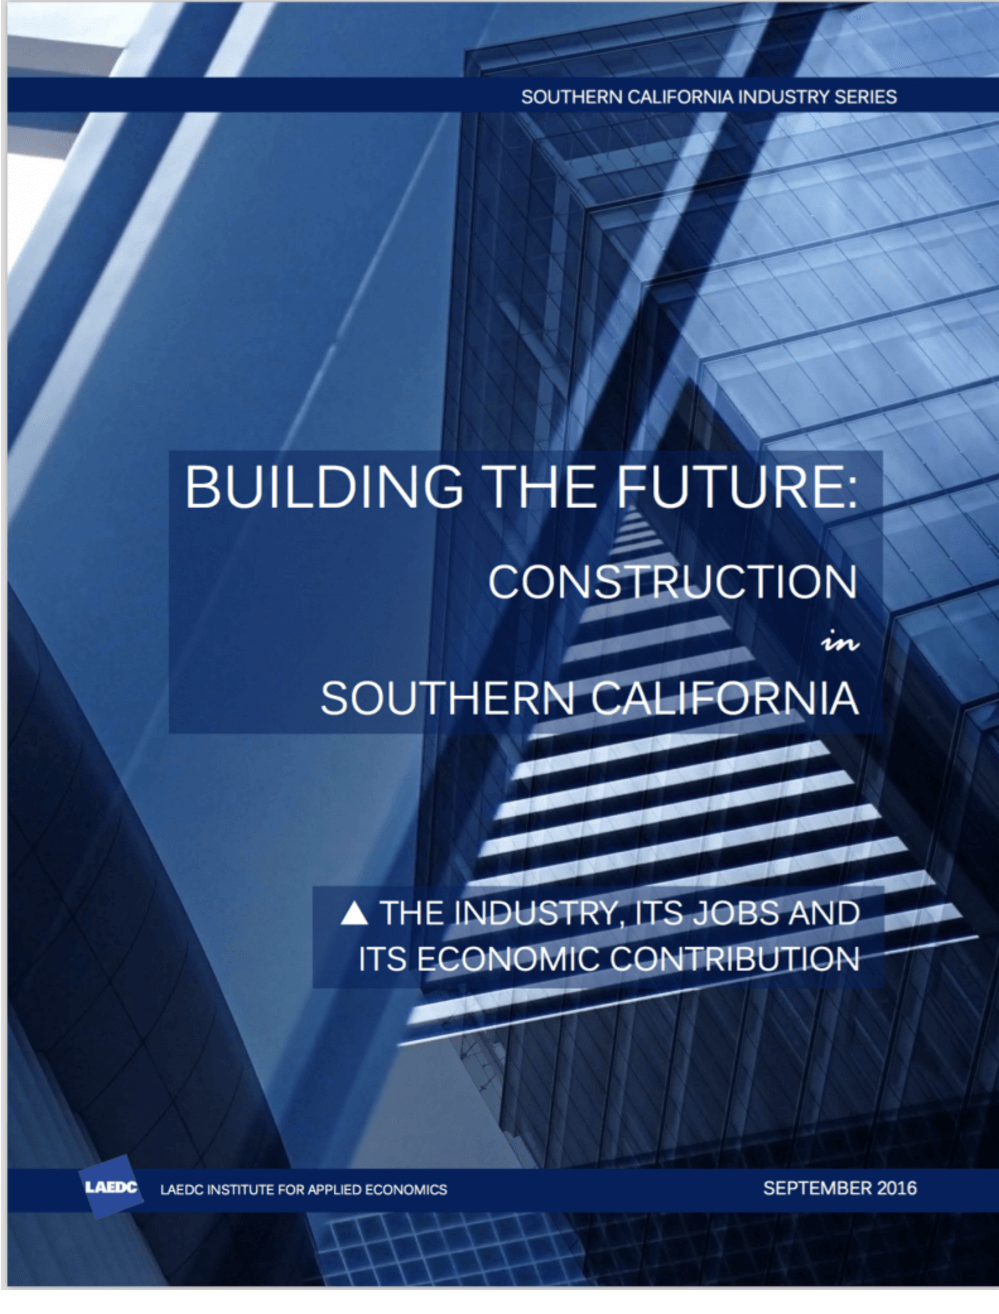 Building the Future: Construction in Southern California, the Industry, its Jobs and its Economic Contribution